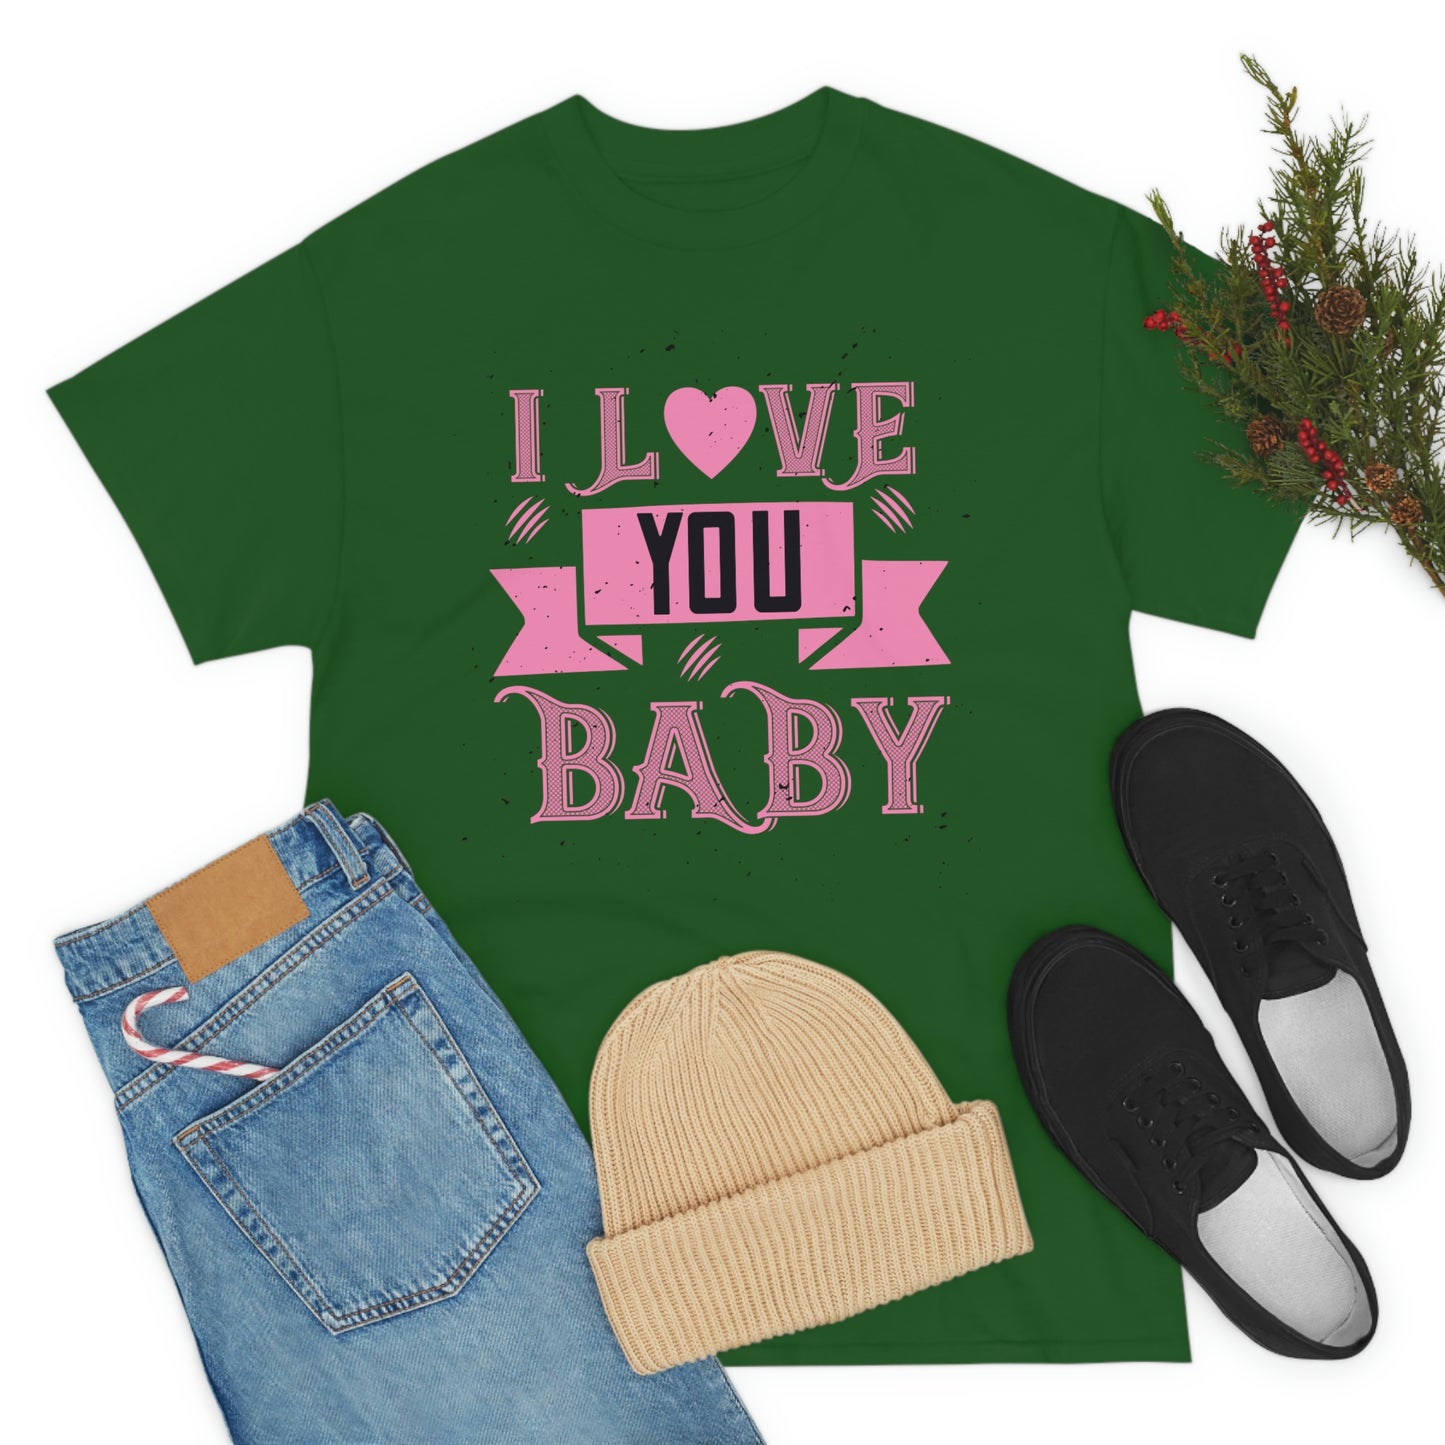 I Love you Baby Cotton Tee